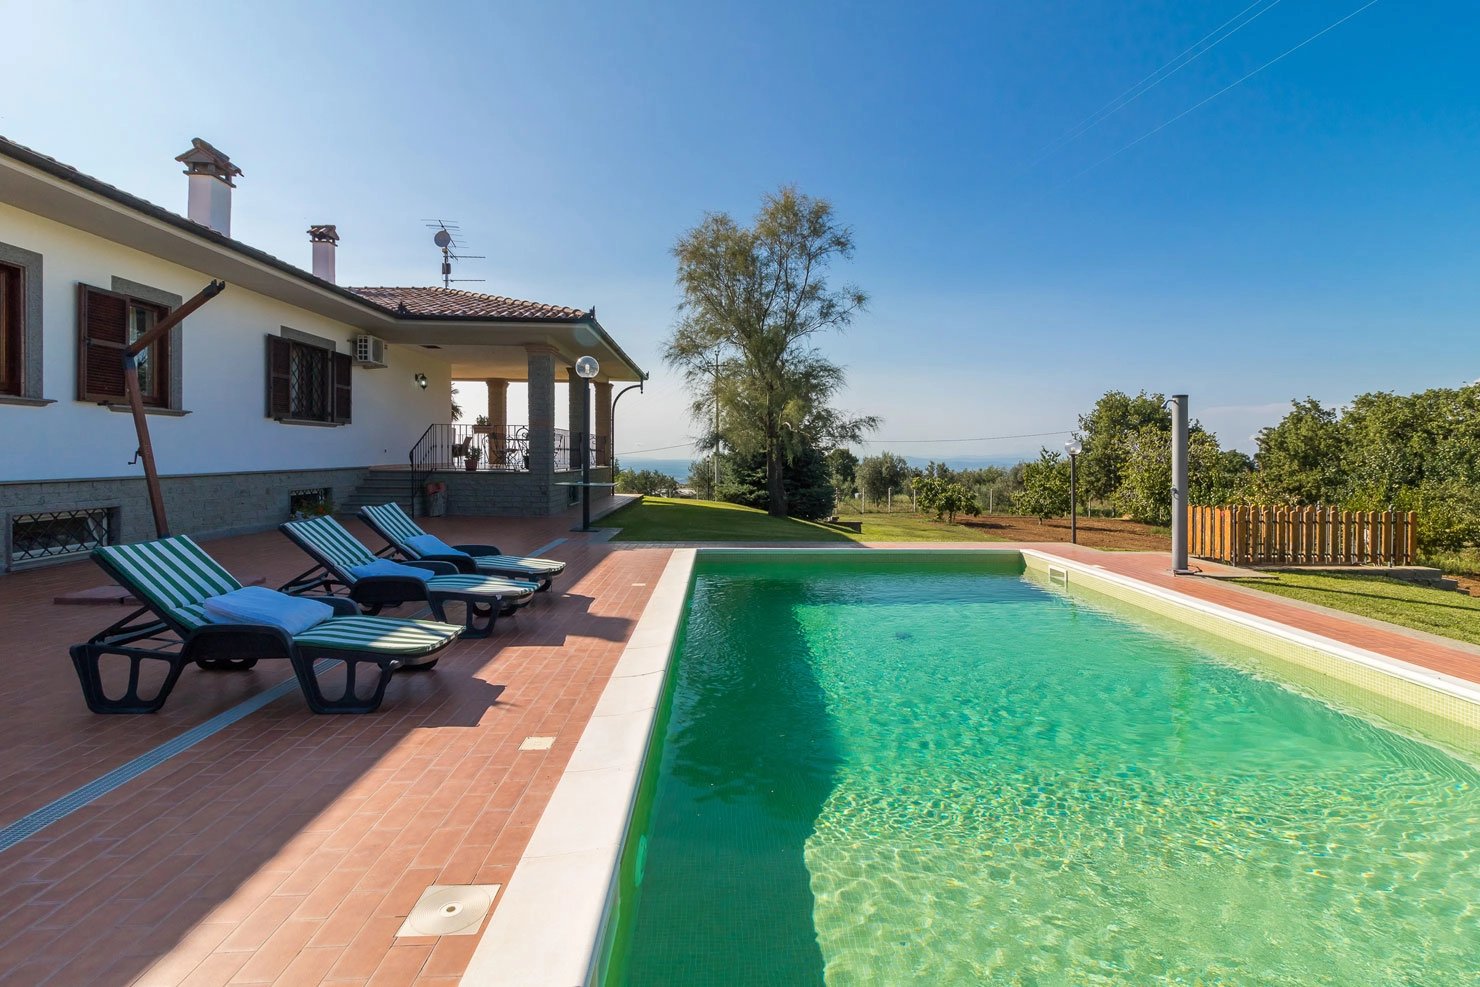 NEW VILLA: Ready-to-live property not isolated, with swimming pool and land